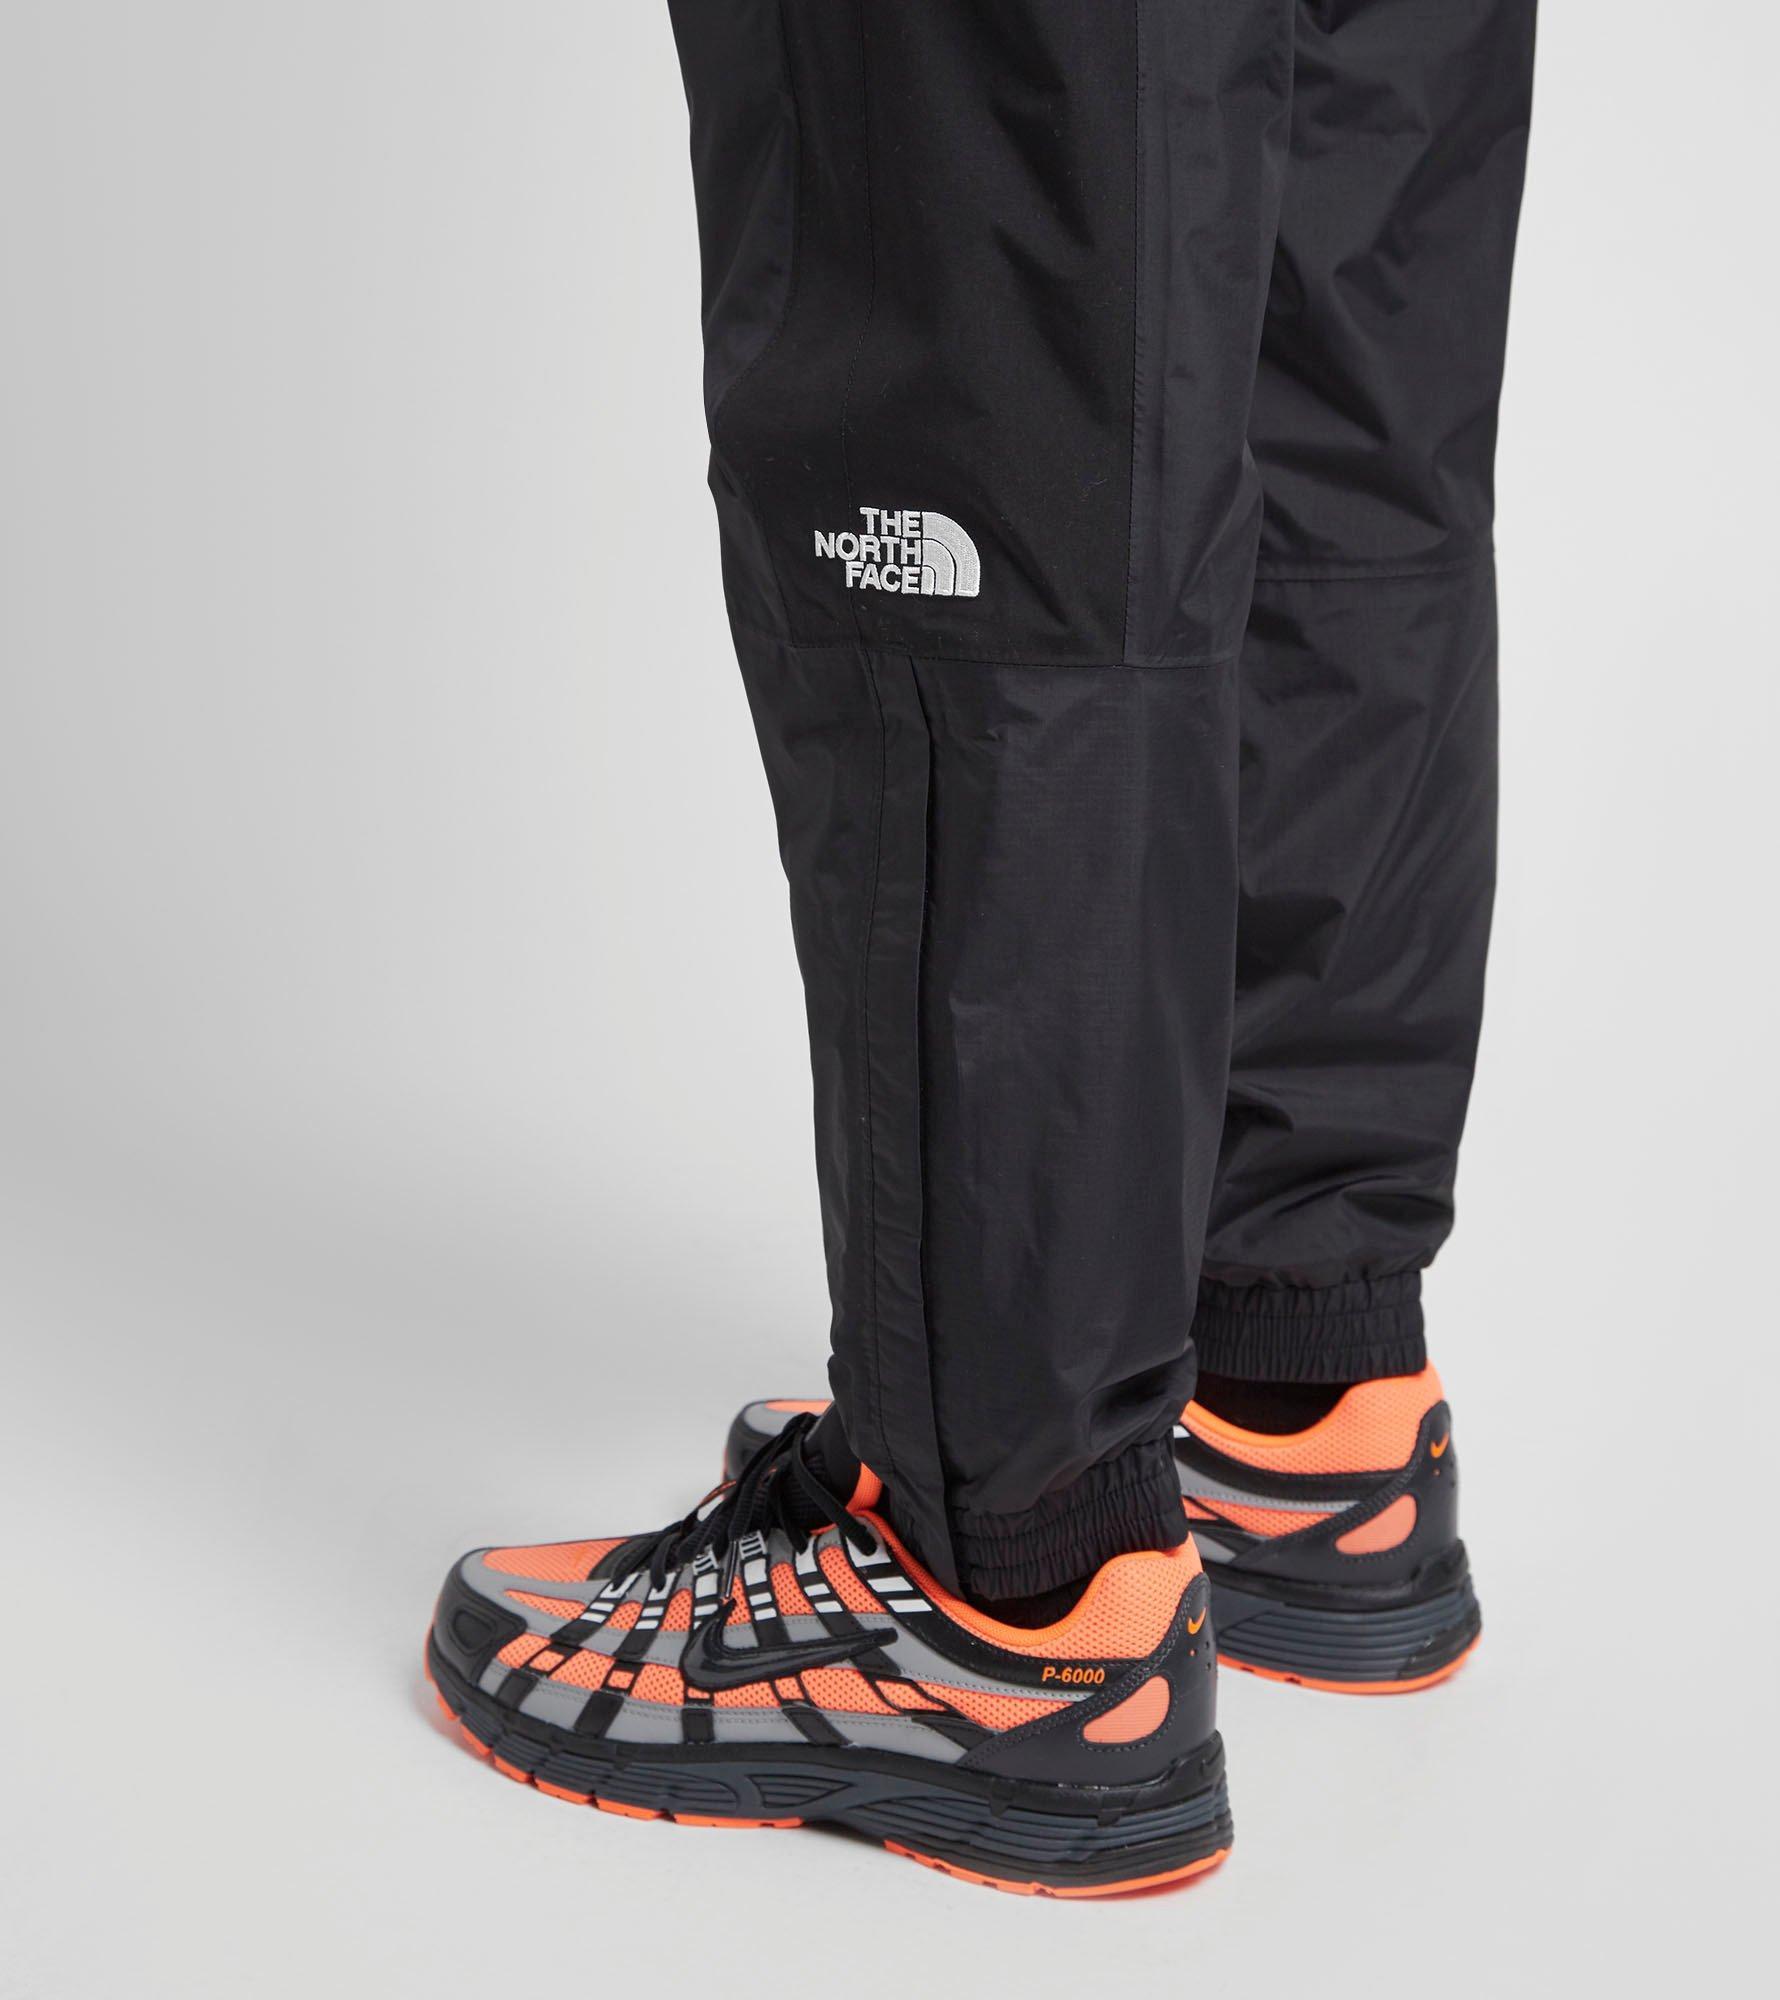 The North Face Synthetic Mountain Light Dryvent Trousers in Black for